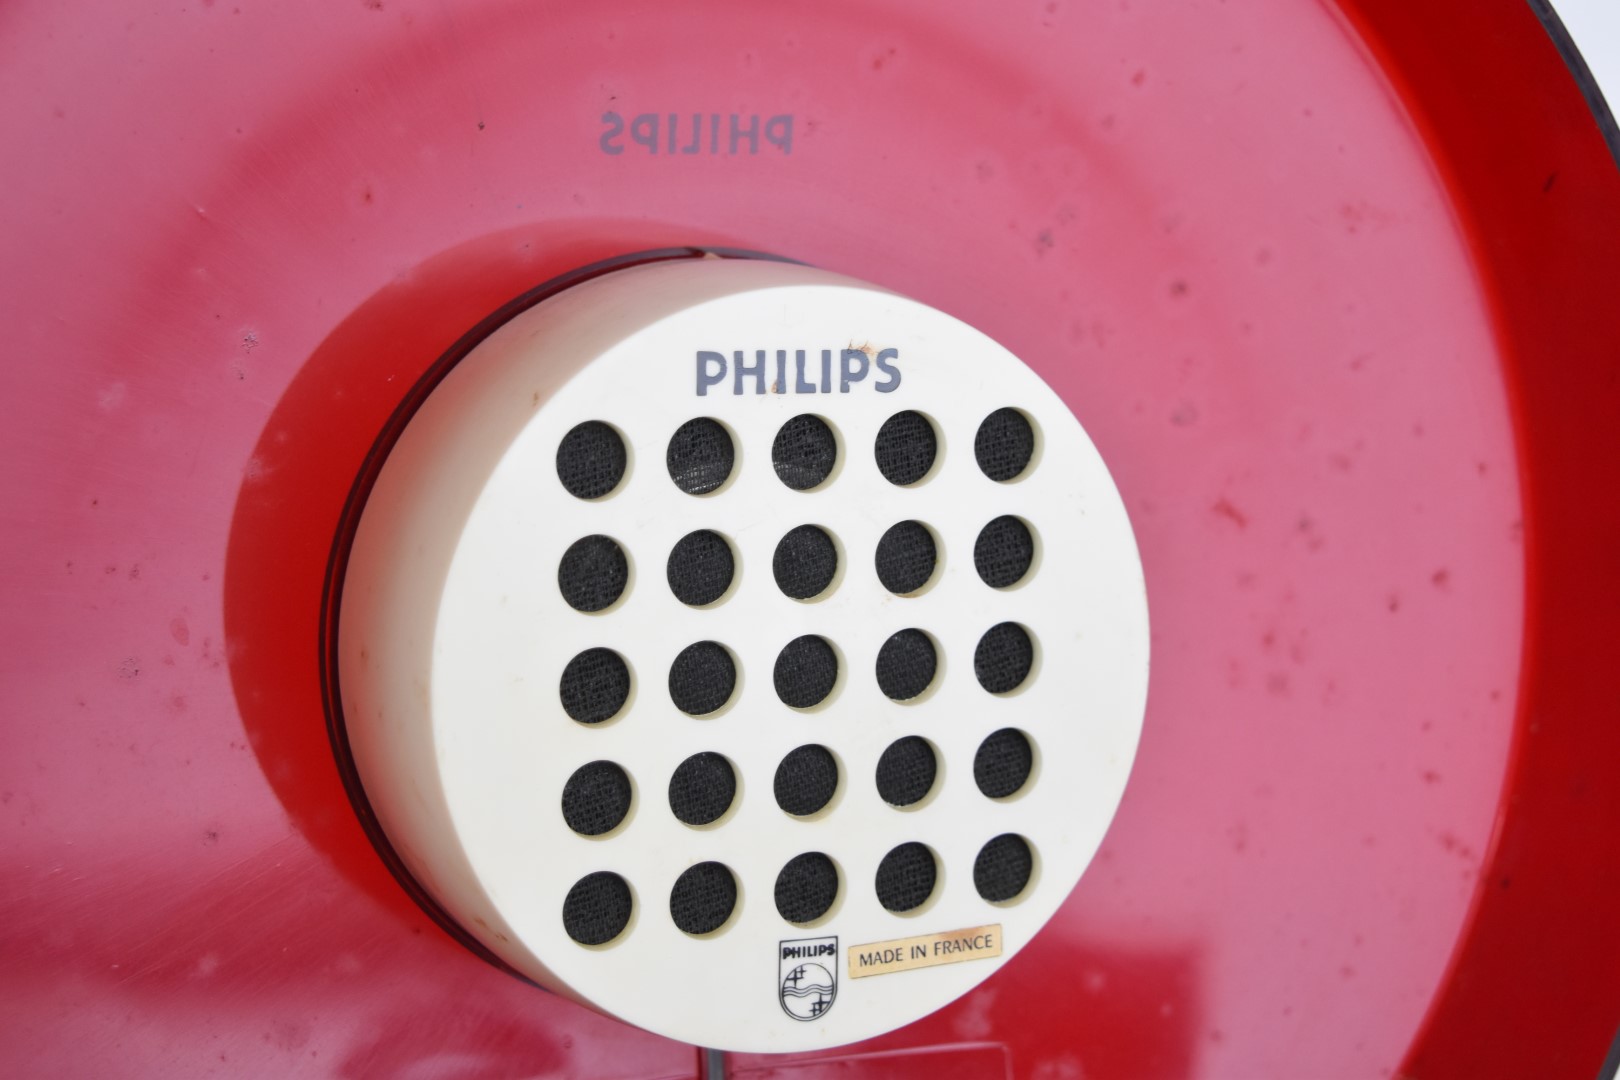 Philips retro UFO record player, model 22GF303/15L, with red plastic cover incorporating speaker - Image 3 of 5